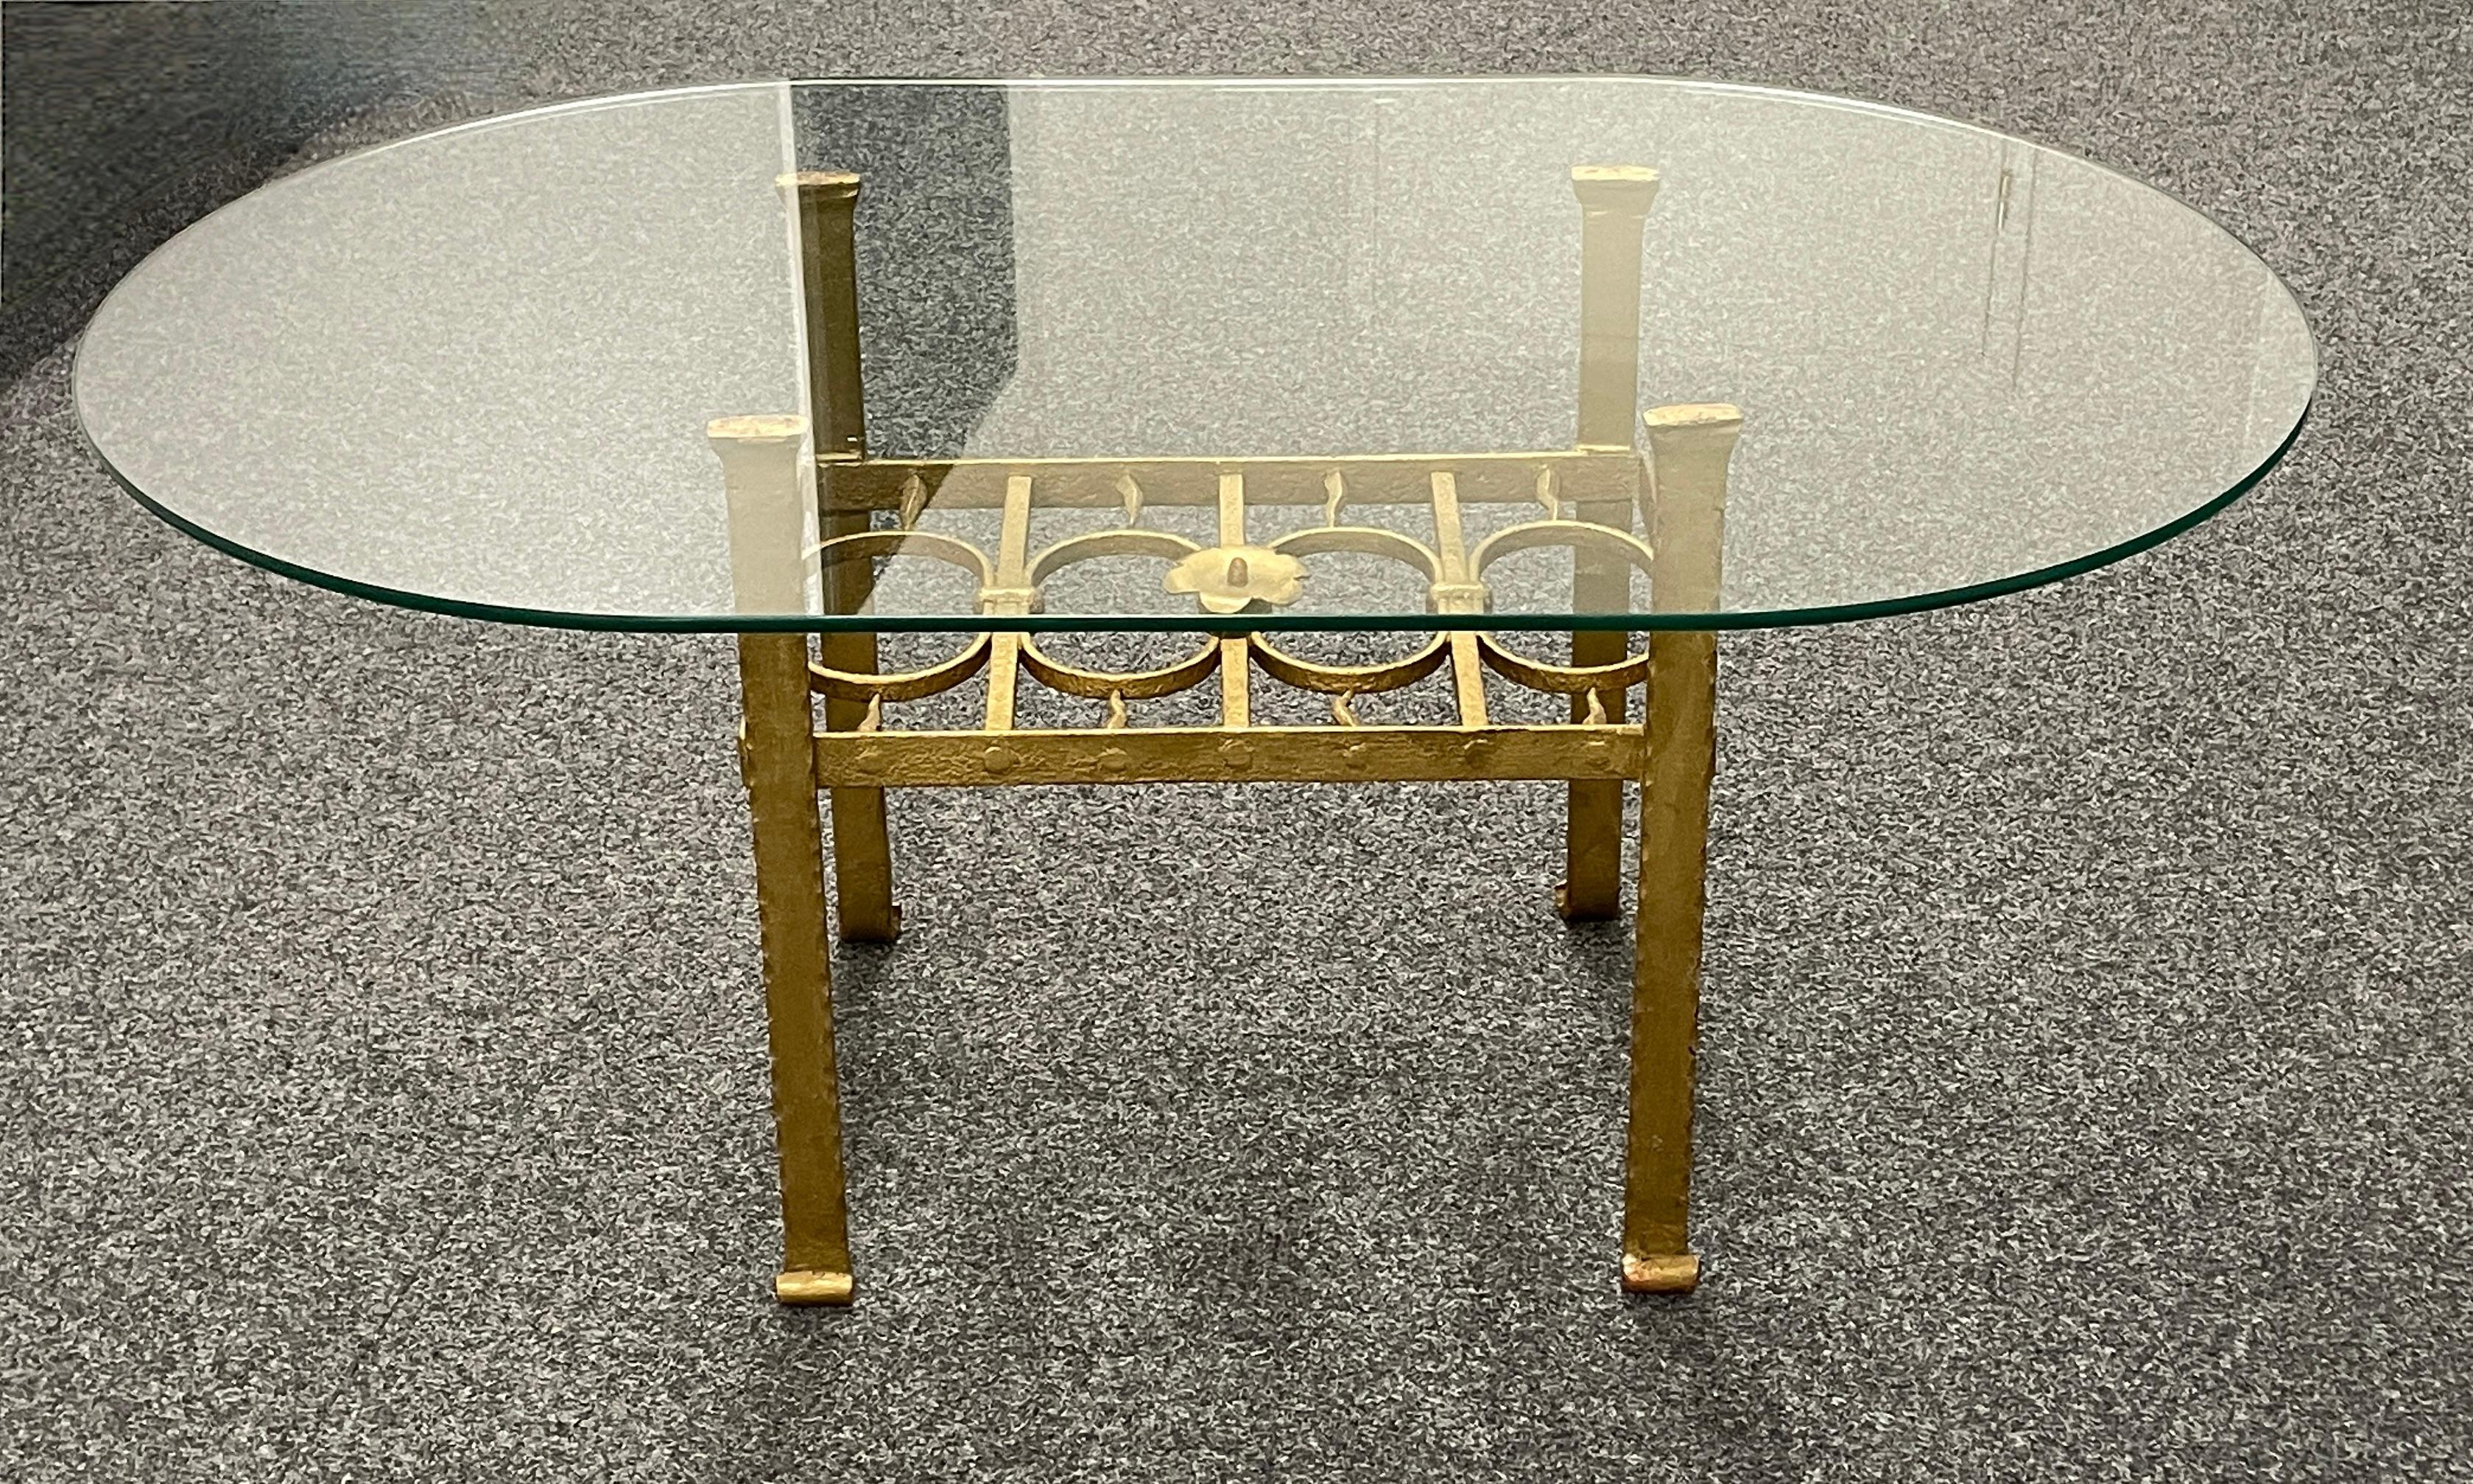 Mid-20th Century Brutalist Gilt Iron Coffee Table, Tole Toleware Style, German, 1960s For Sale